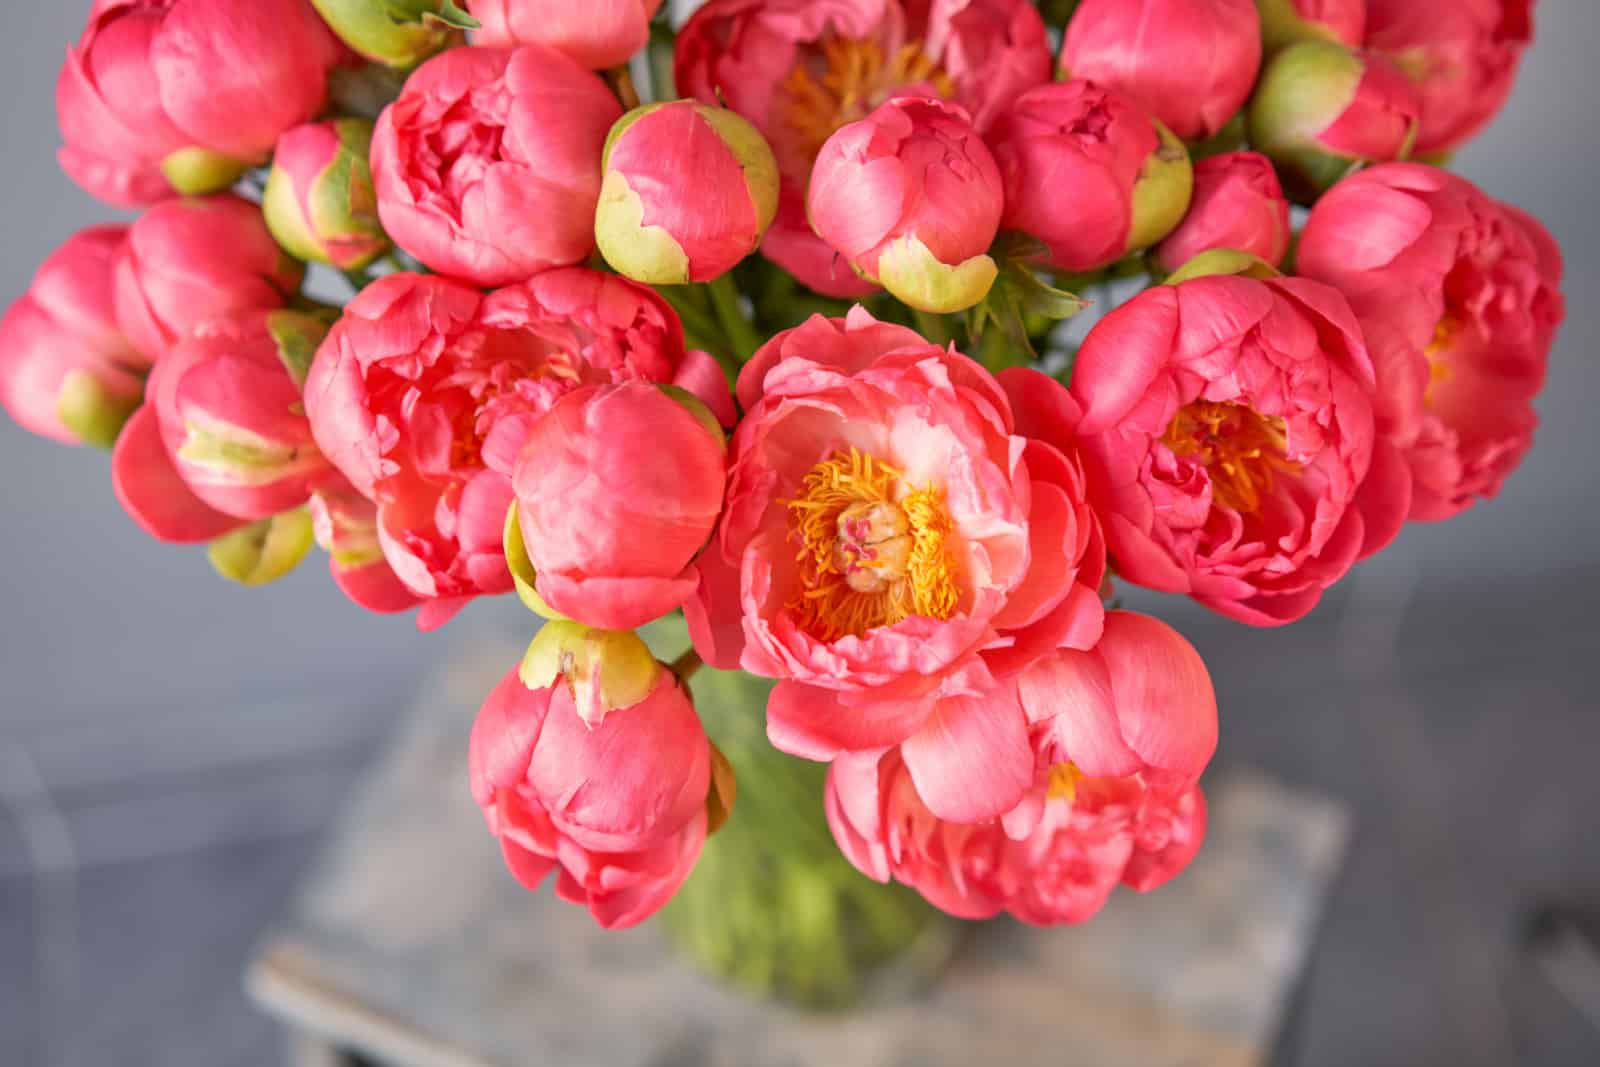 Coral peonies in a glass vase on wooden table.